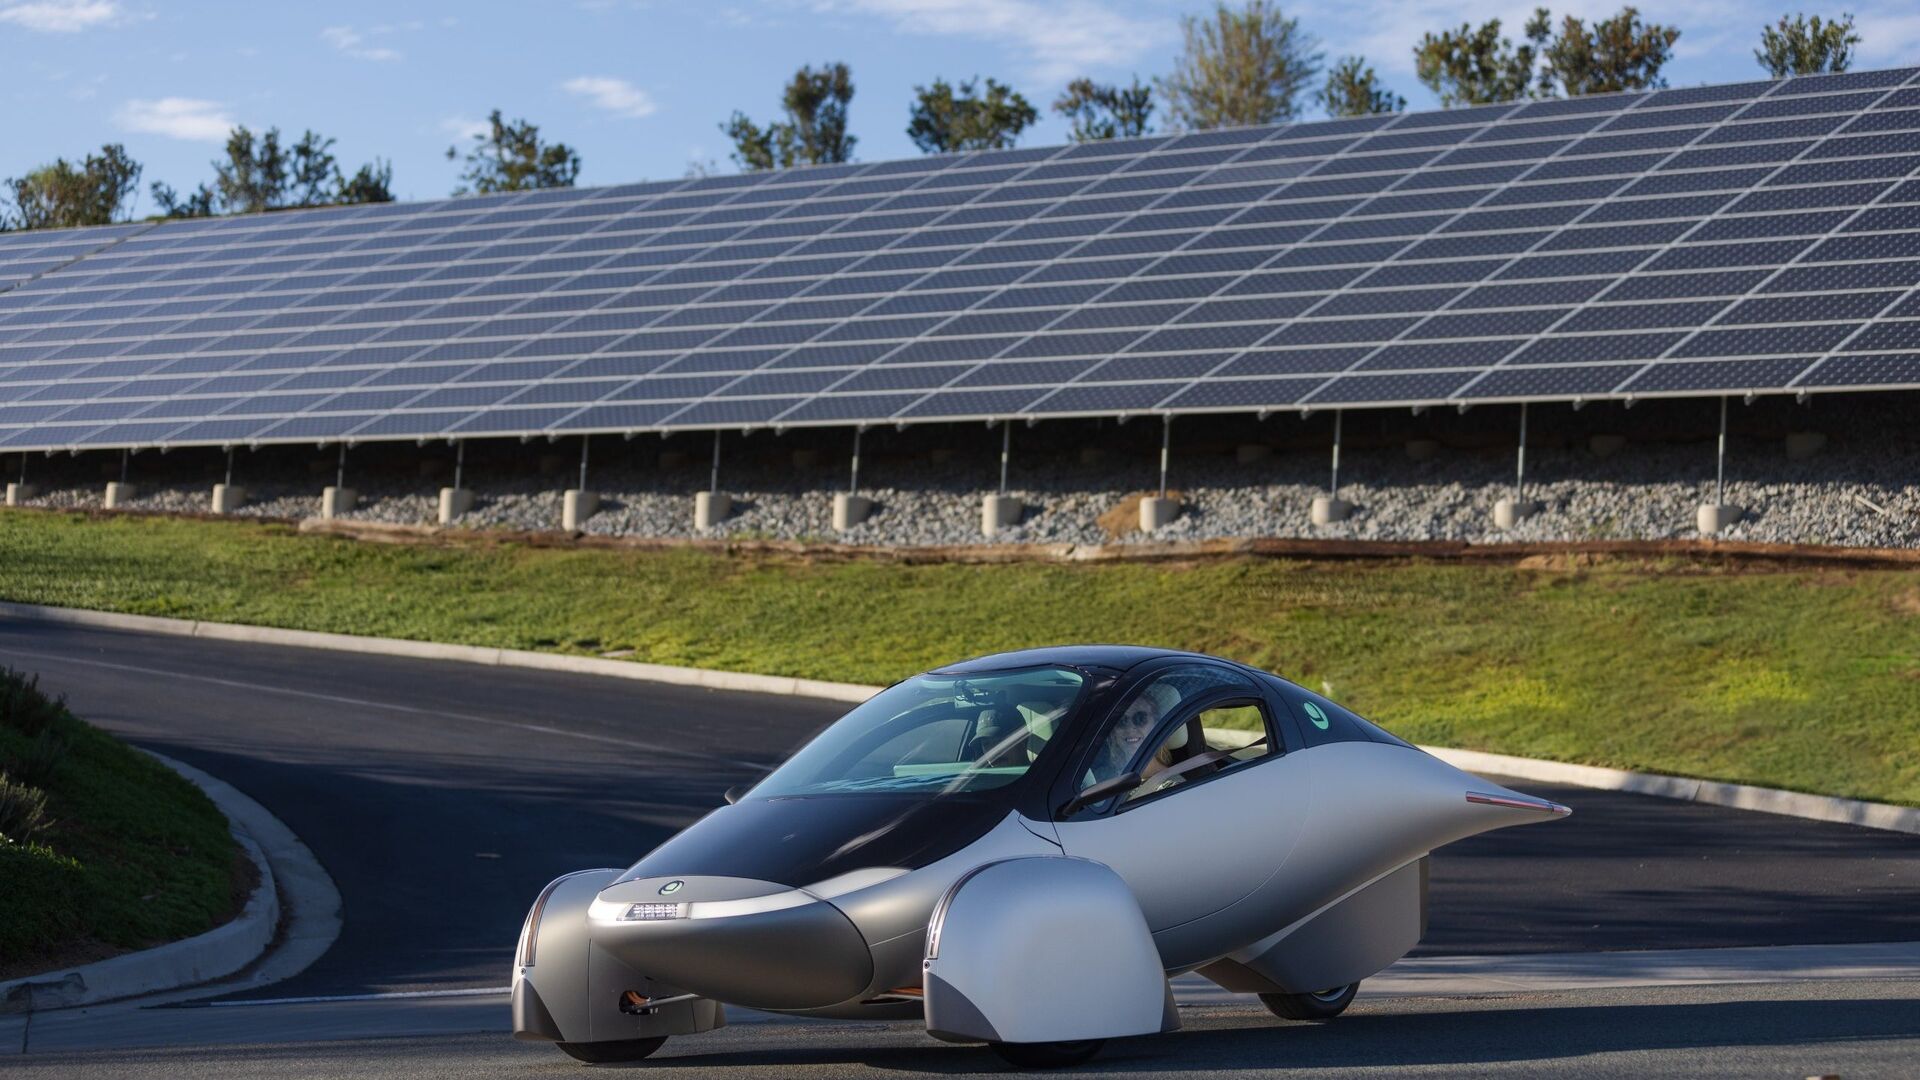 Solar car: the Aptera Delta is the most sustainable car in the world, with a range of 1600 km on battery power and 70 km on solar energy